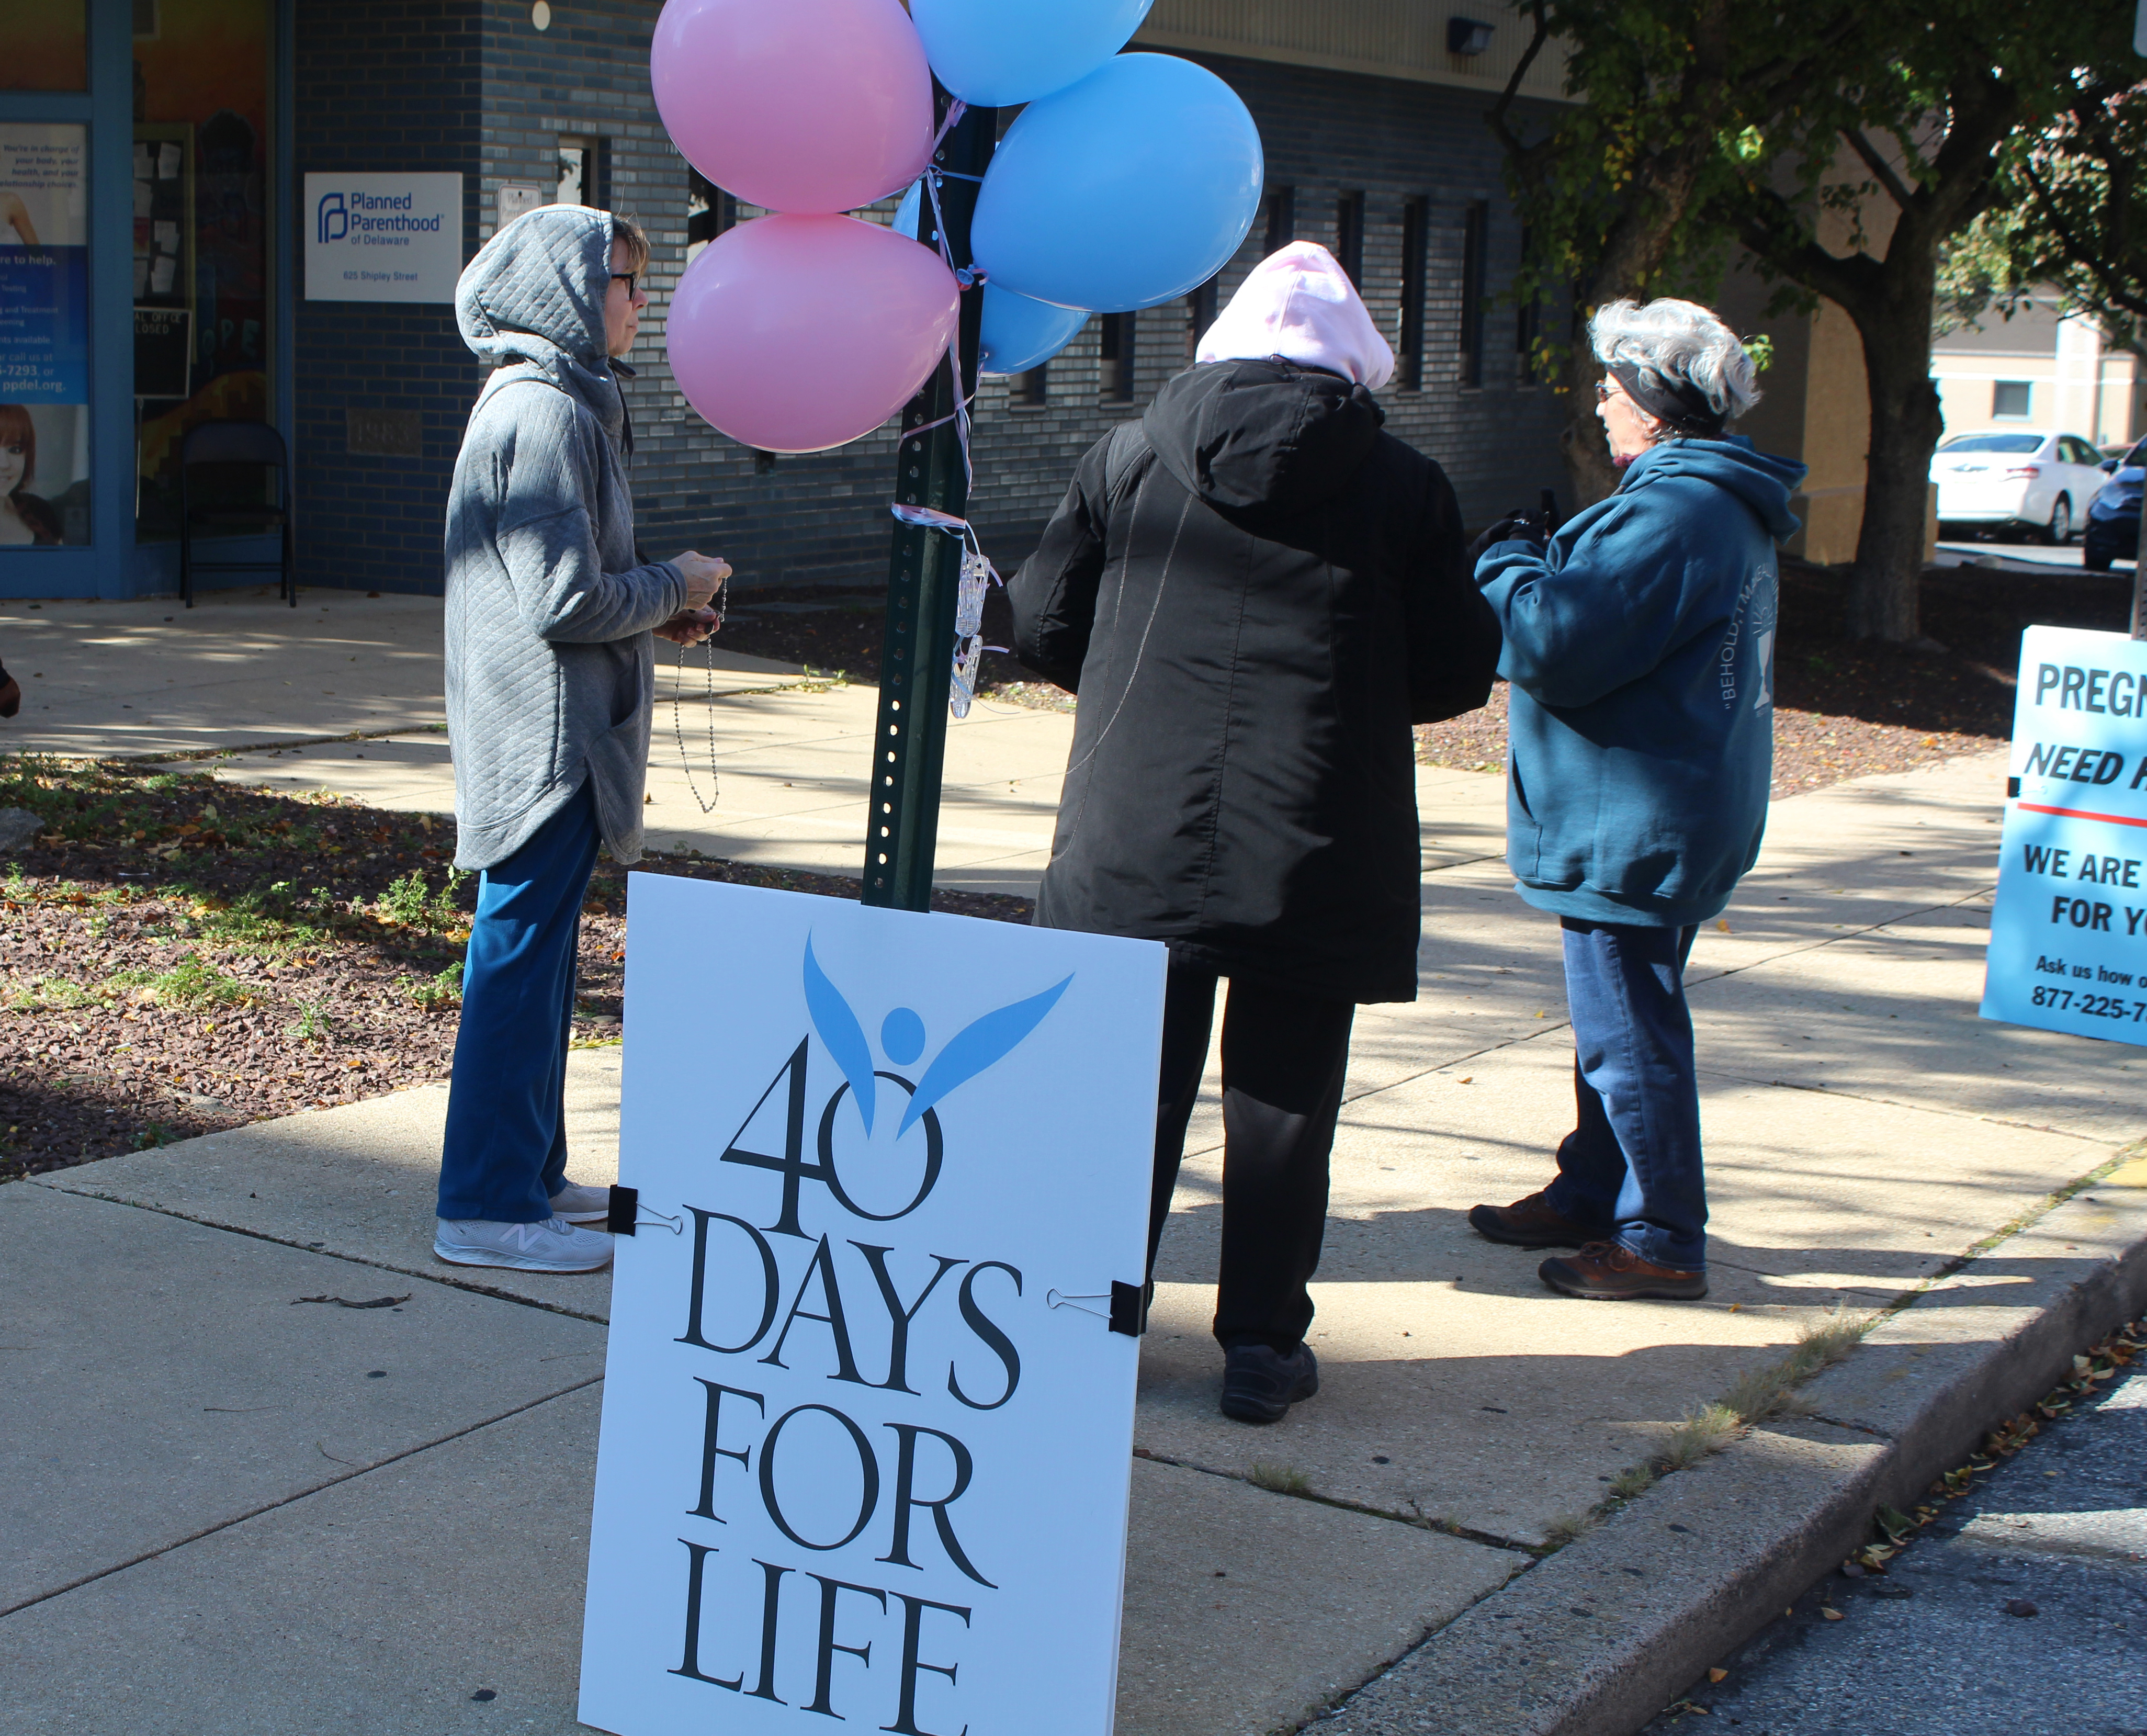 '40 Days for Life' volunteers hold vigil outside Planned Parenthood in Wilmington ...4104 x 3318